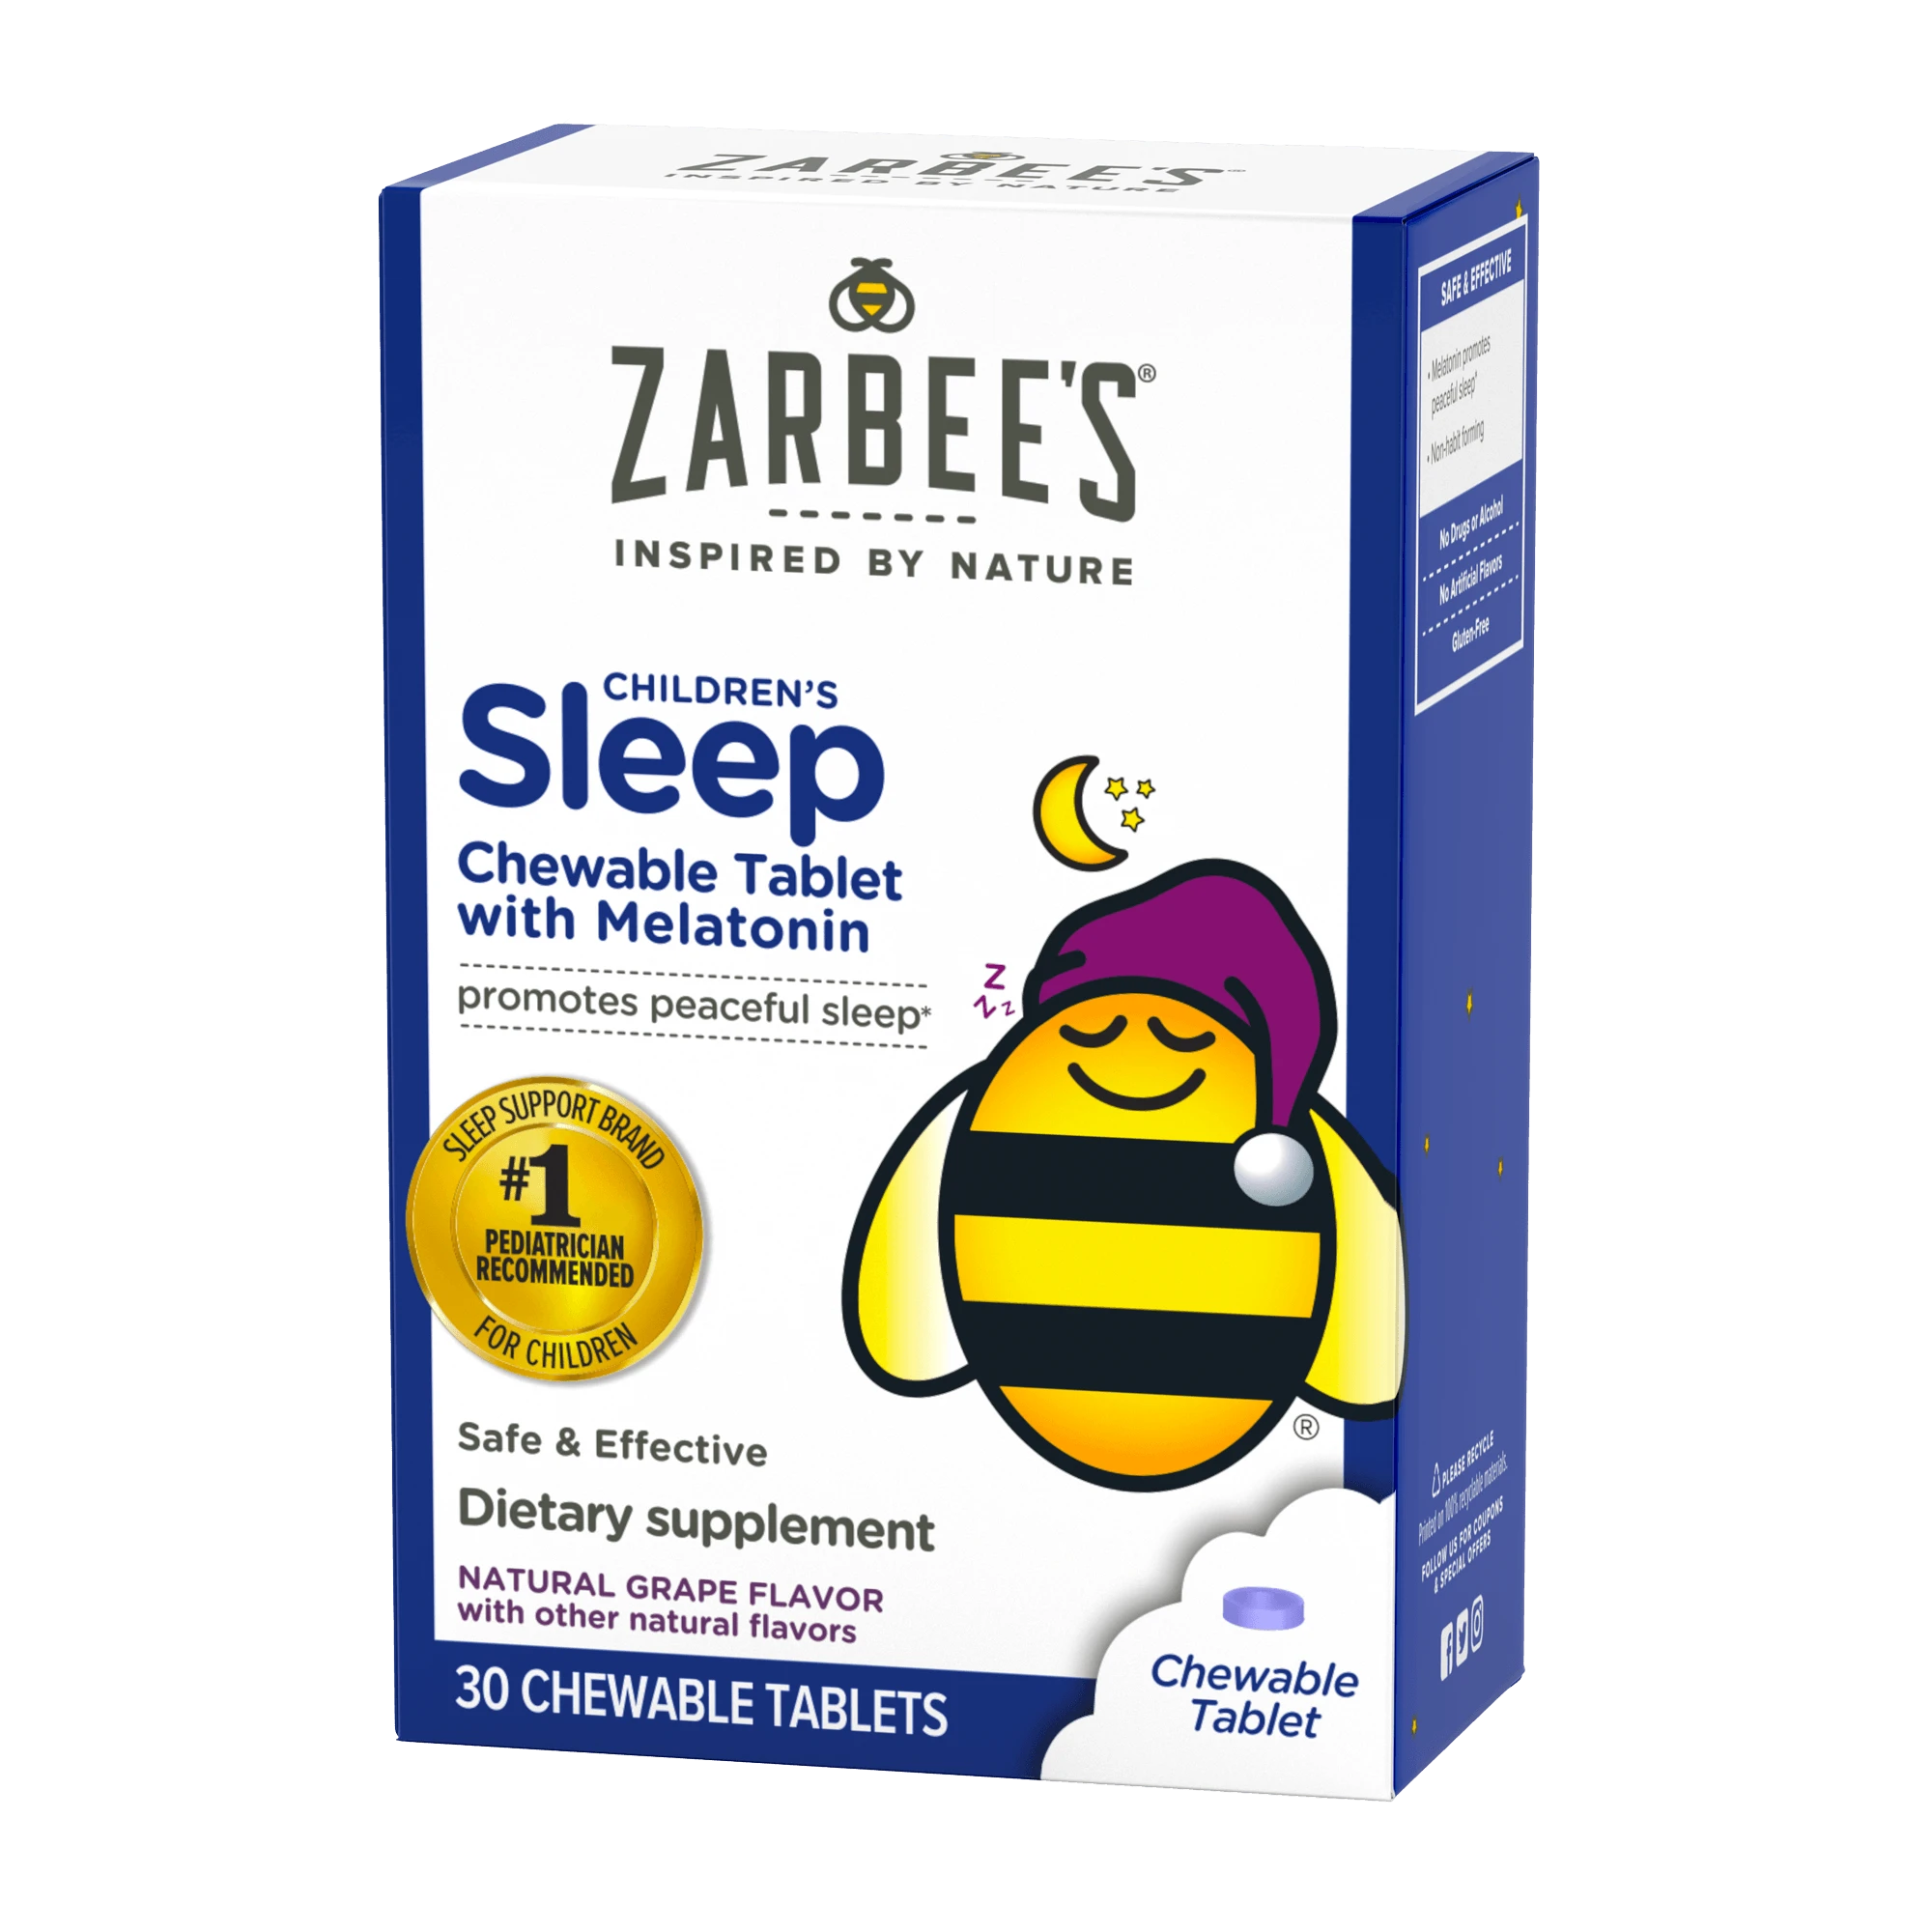 A rendering of the packaging for Zarbee’s® Children's Sleep Chewable Tablet with Melatonin in natural grape flavor